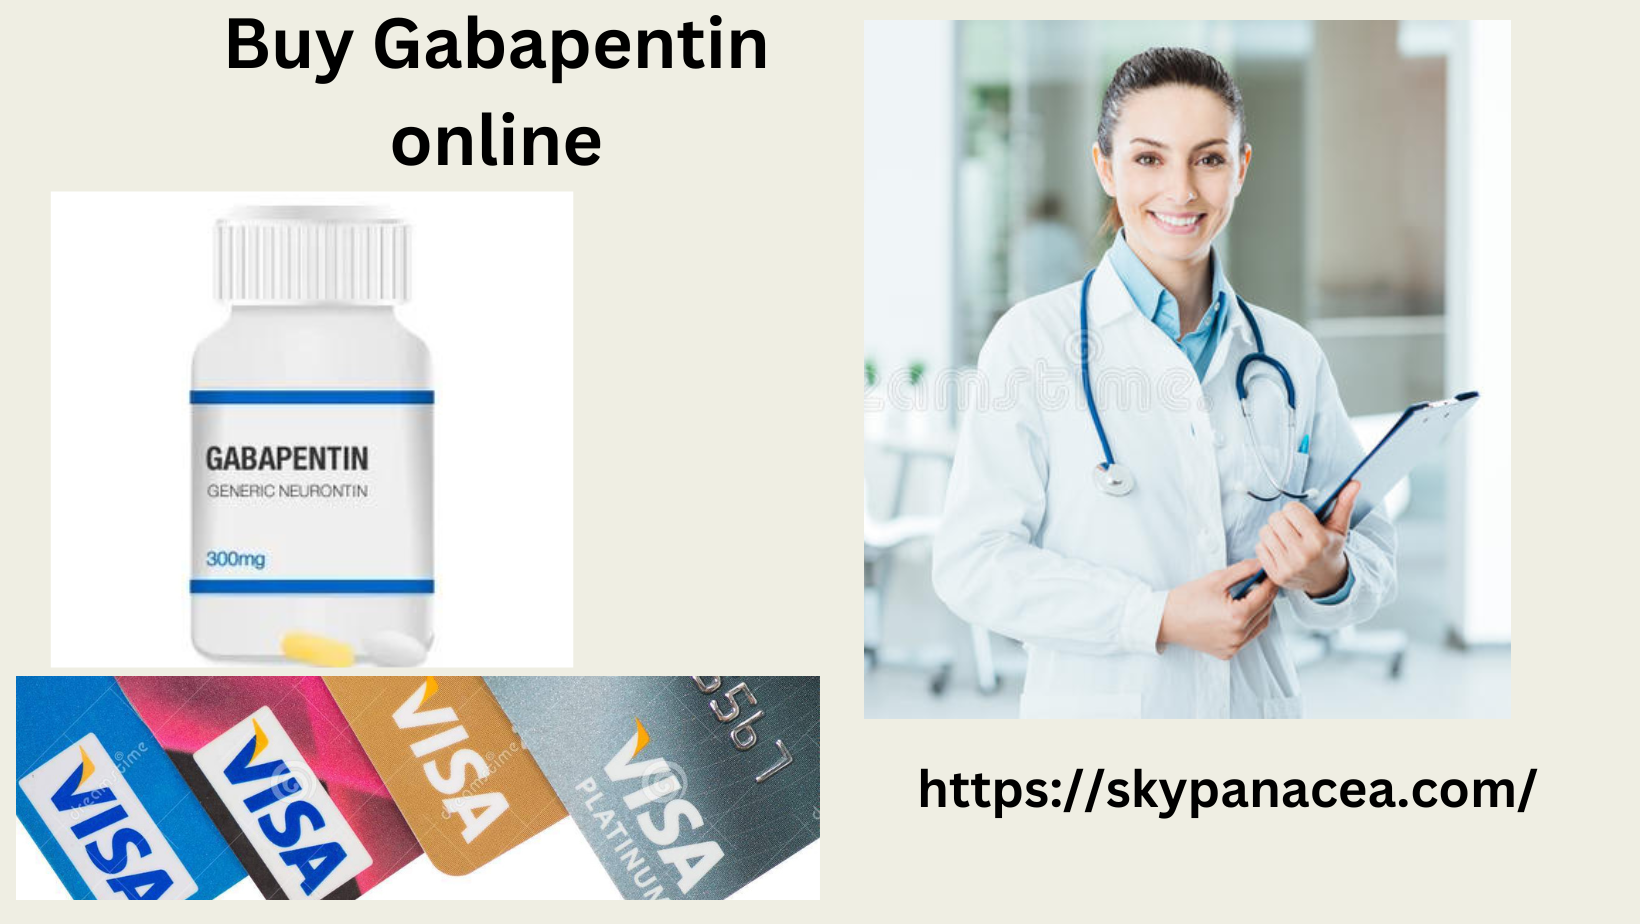 Best Place To Buy Gabapentin Online Legally